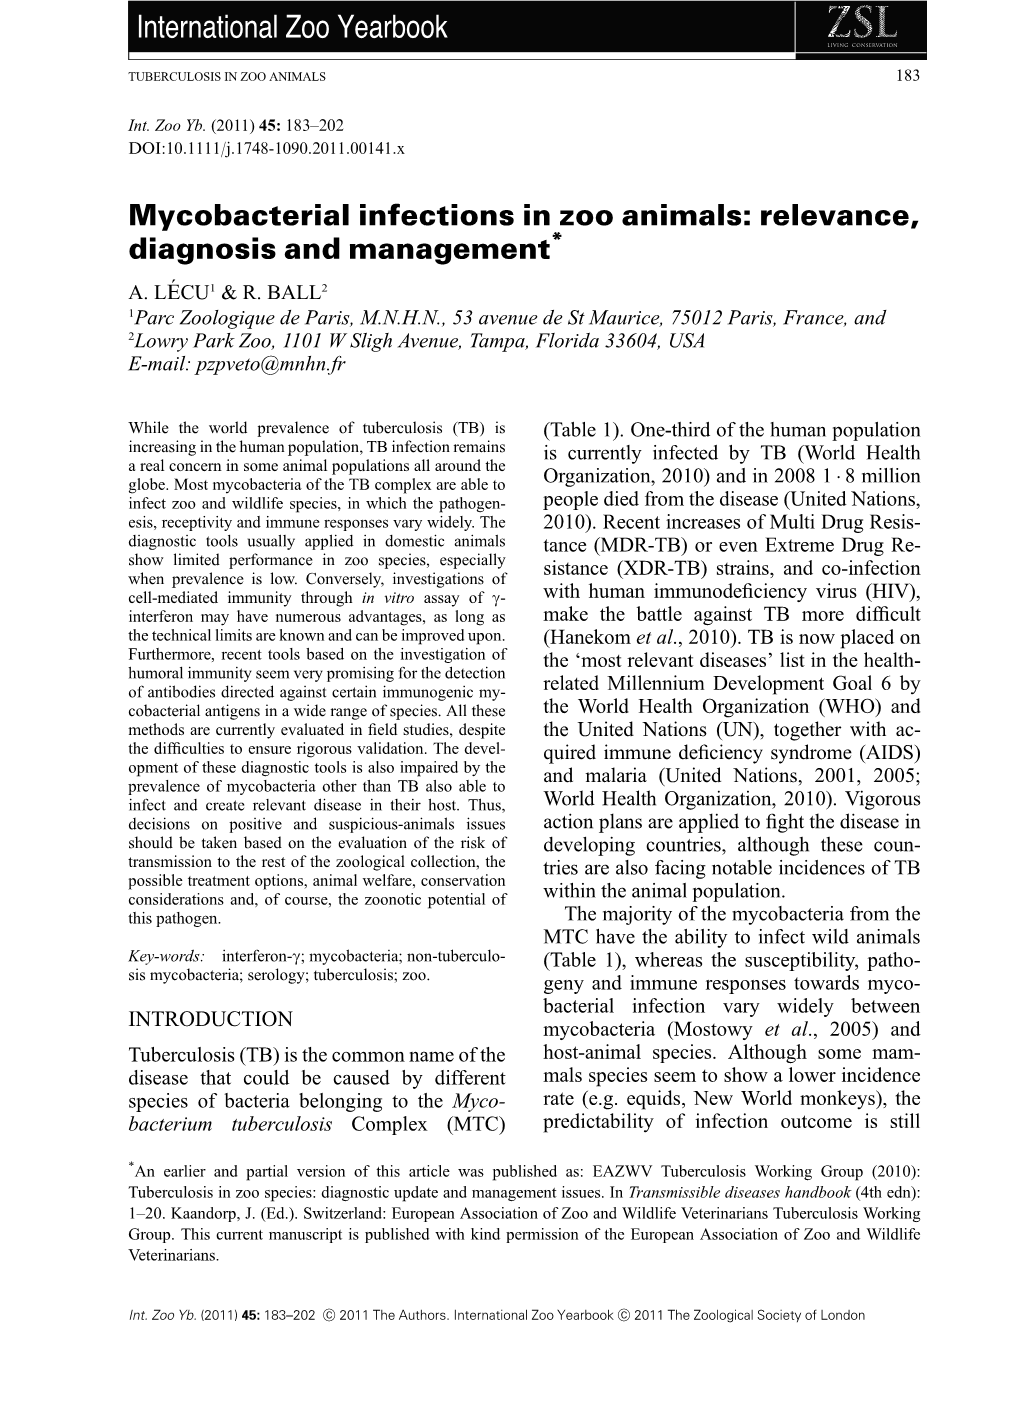 Mycobacterial Infections in Zoo Animals: Relevance, Diagnosis and Management* A